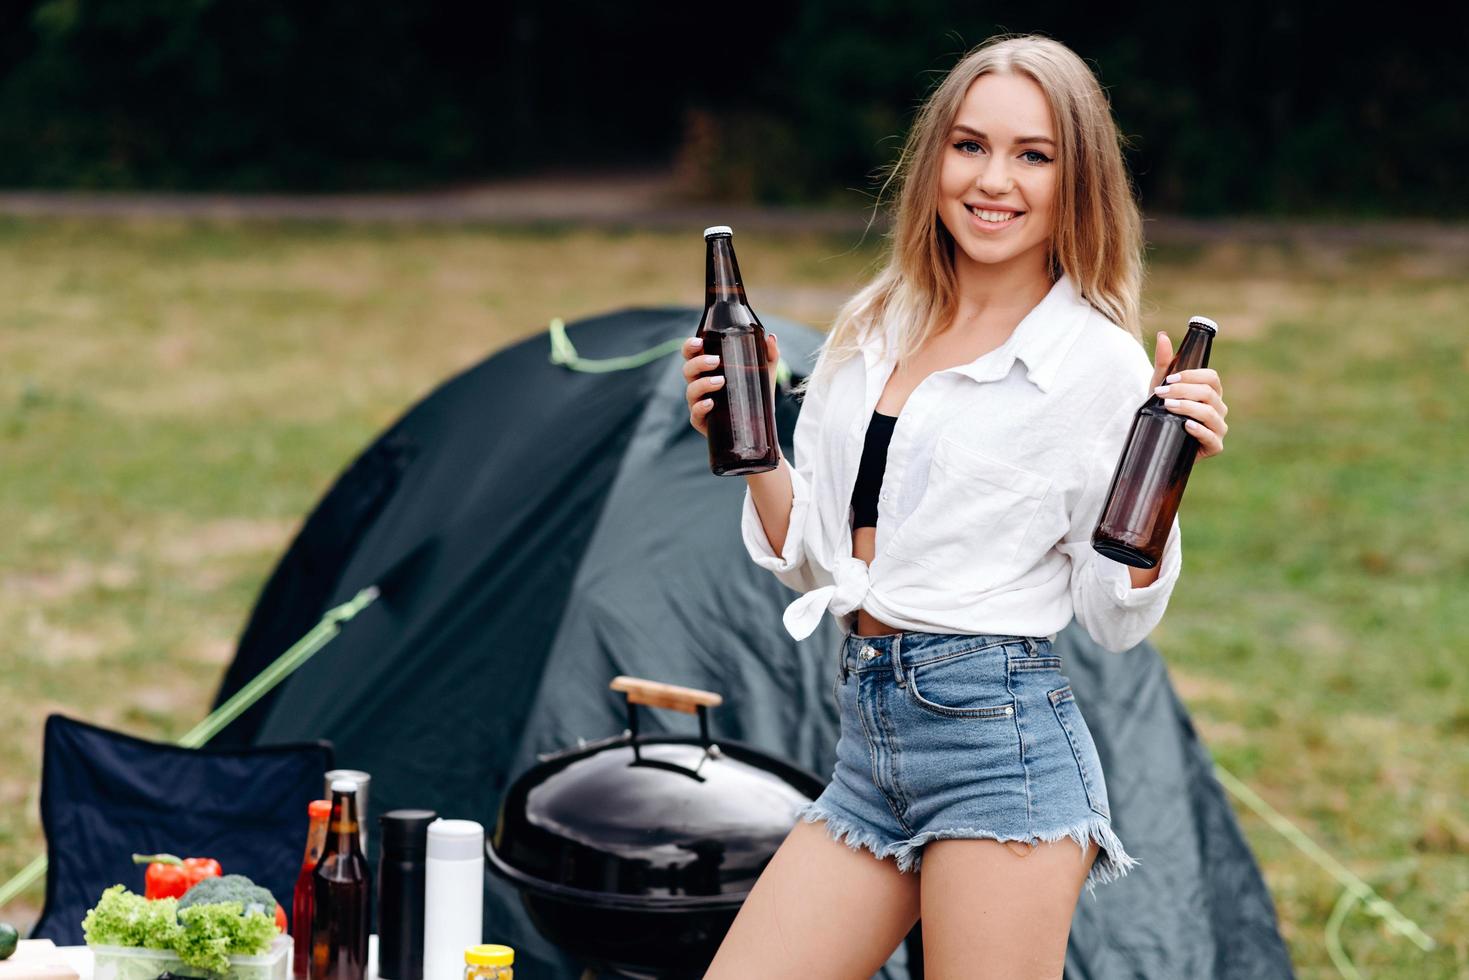 Woman standing and holding a beer in the camping photo